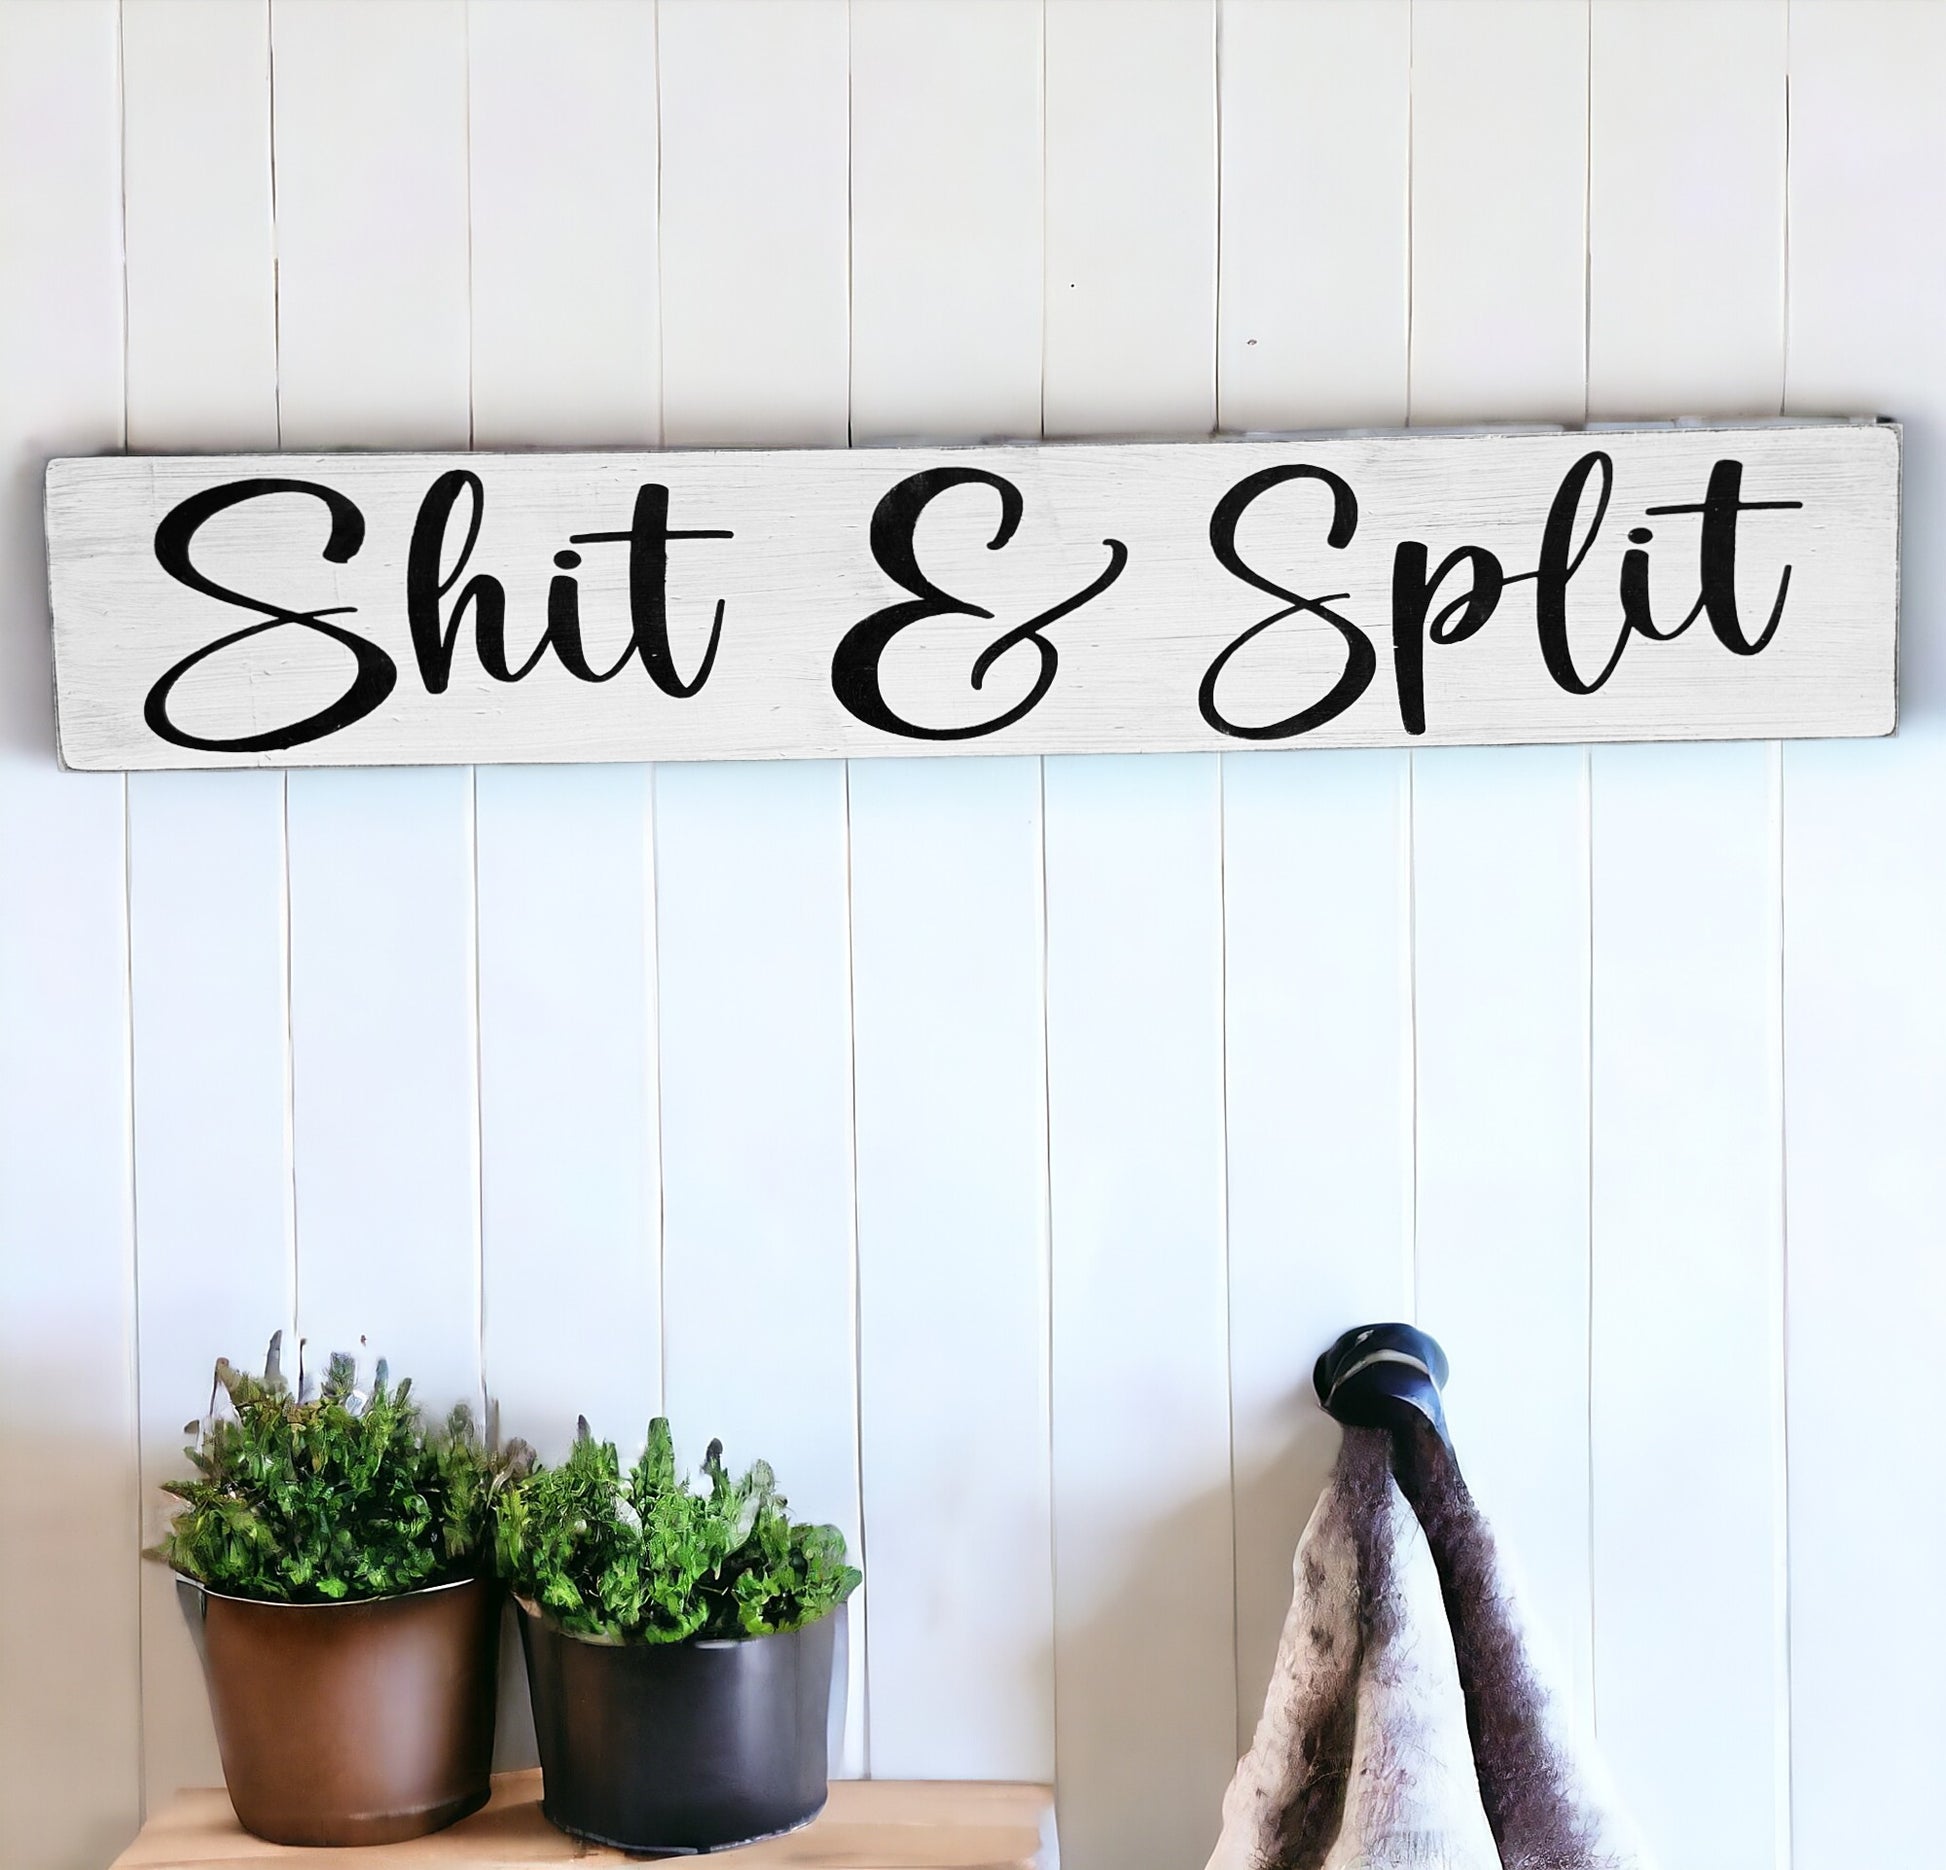 Handcrafted wooden bathroom sign with black text on white background: 'Shit & Split.' Measures 4" x 24". Adds humor to bathroom decor.